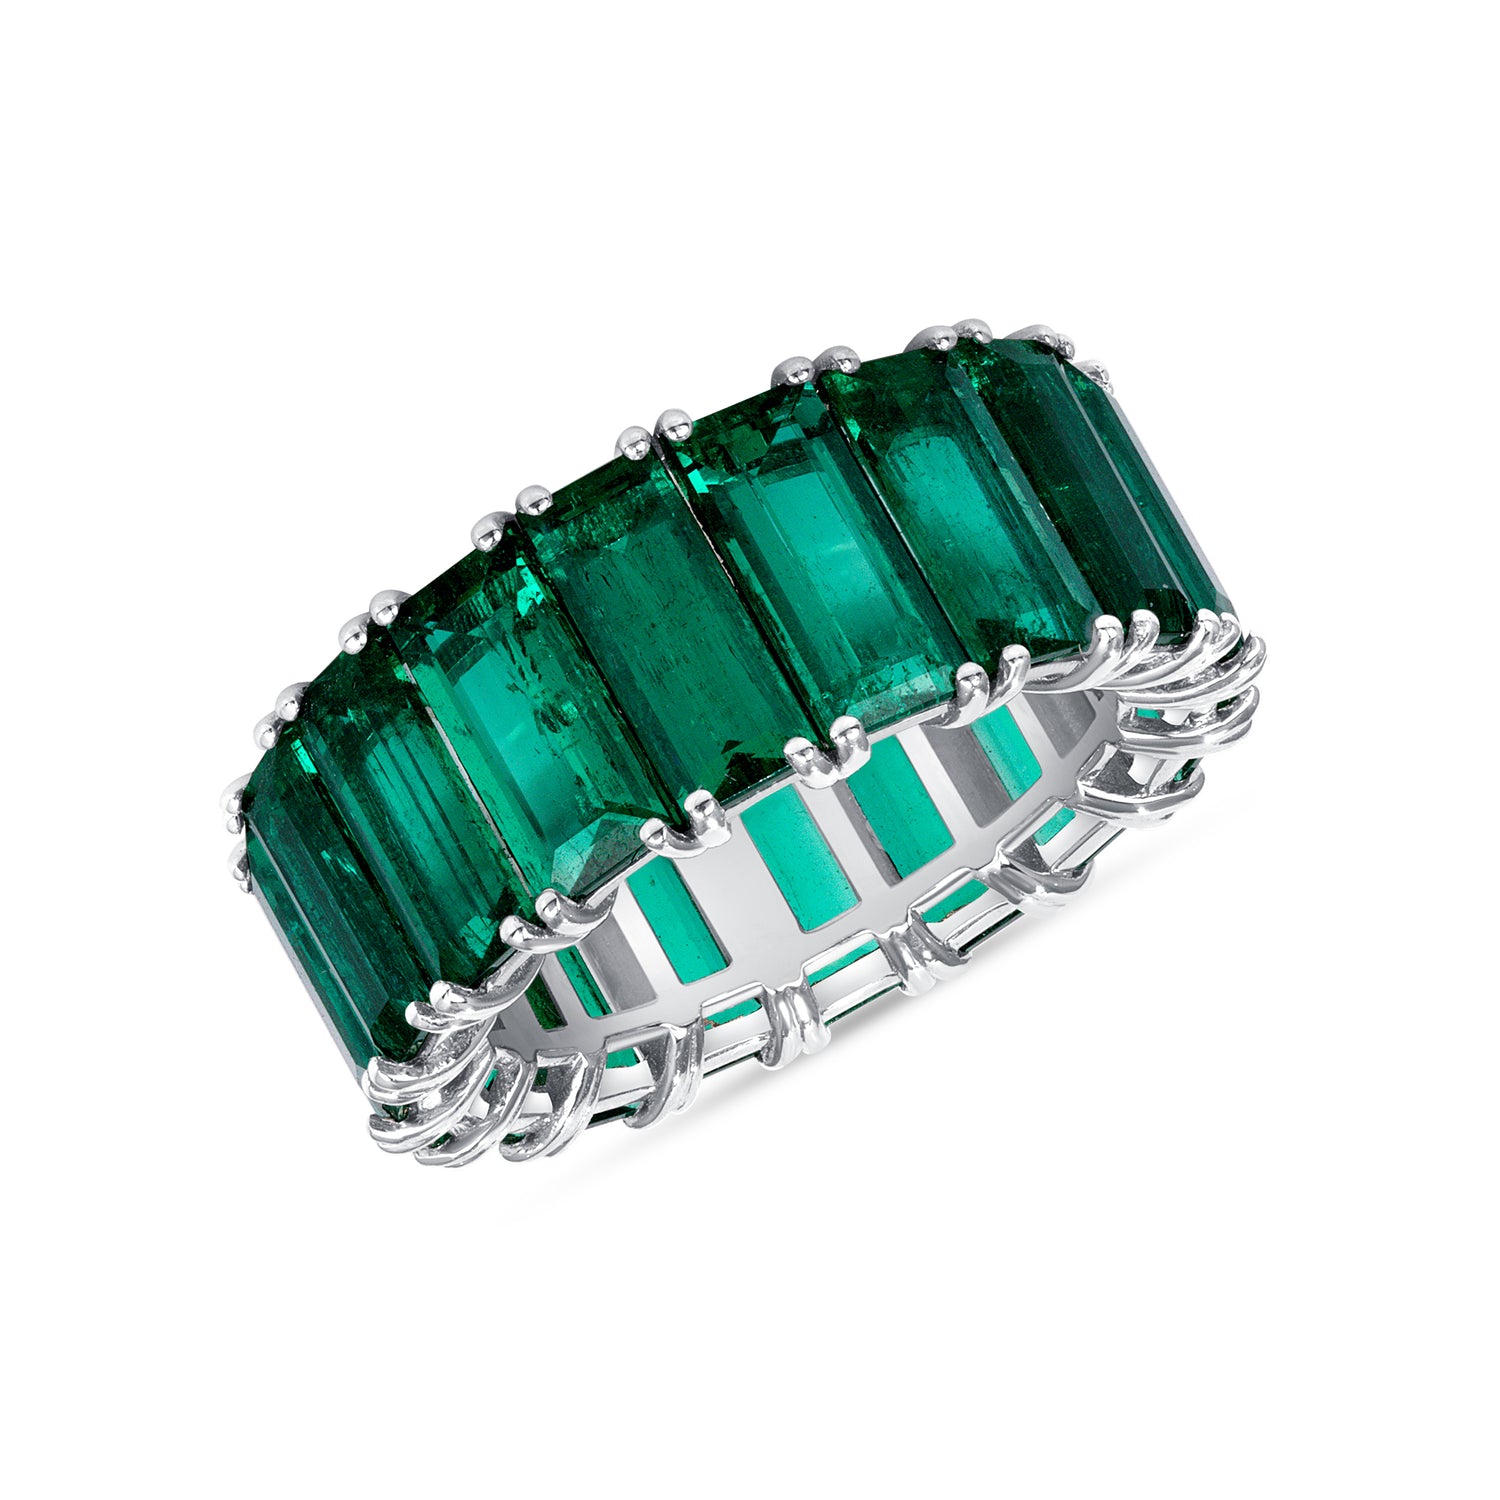 Classic eternity band featuring 18 baguette-cut emeralds on a shared prong setting